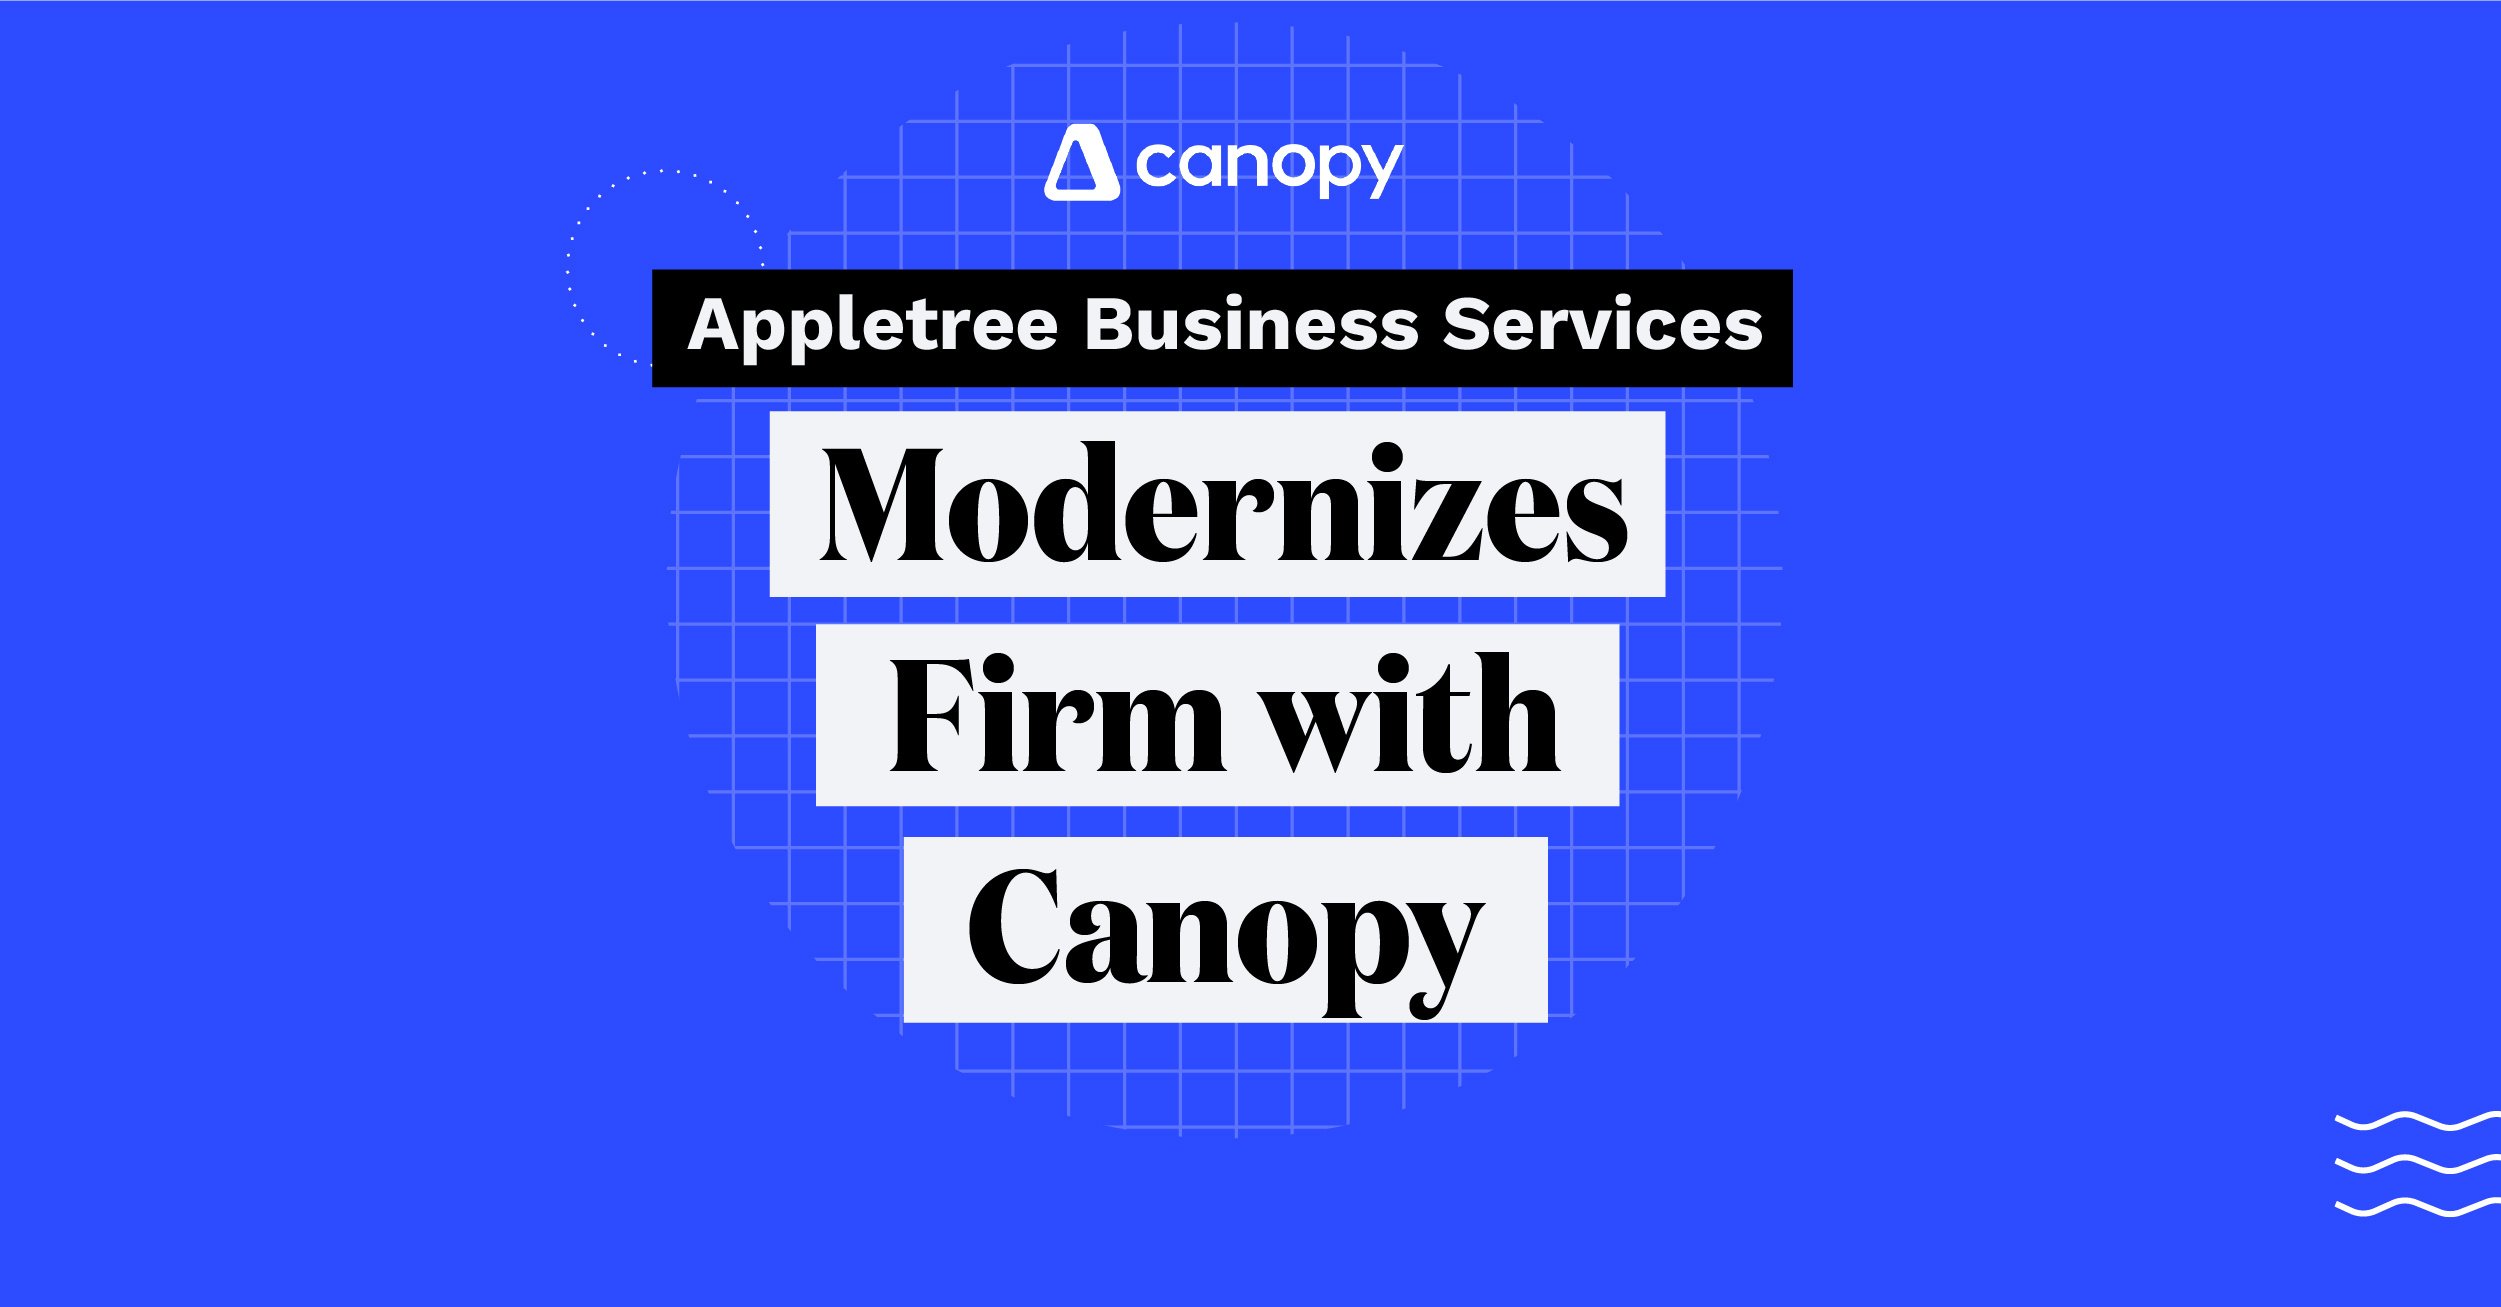 Appletree Business Services Modernizes Firm with Canopy